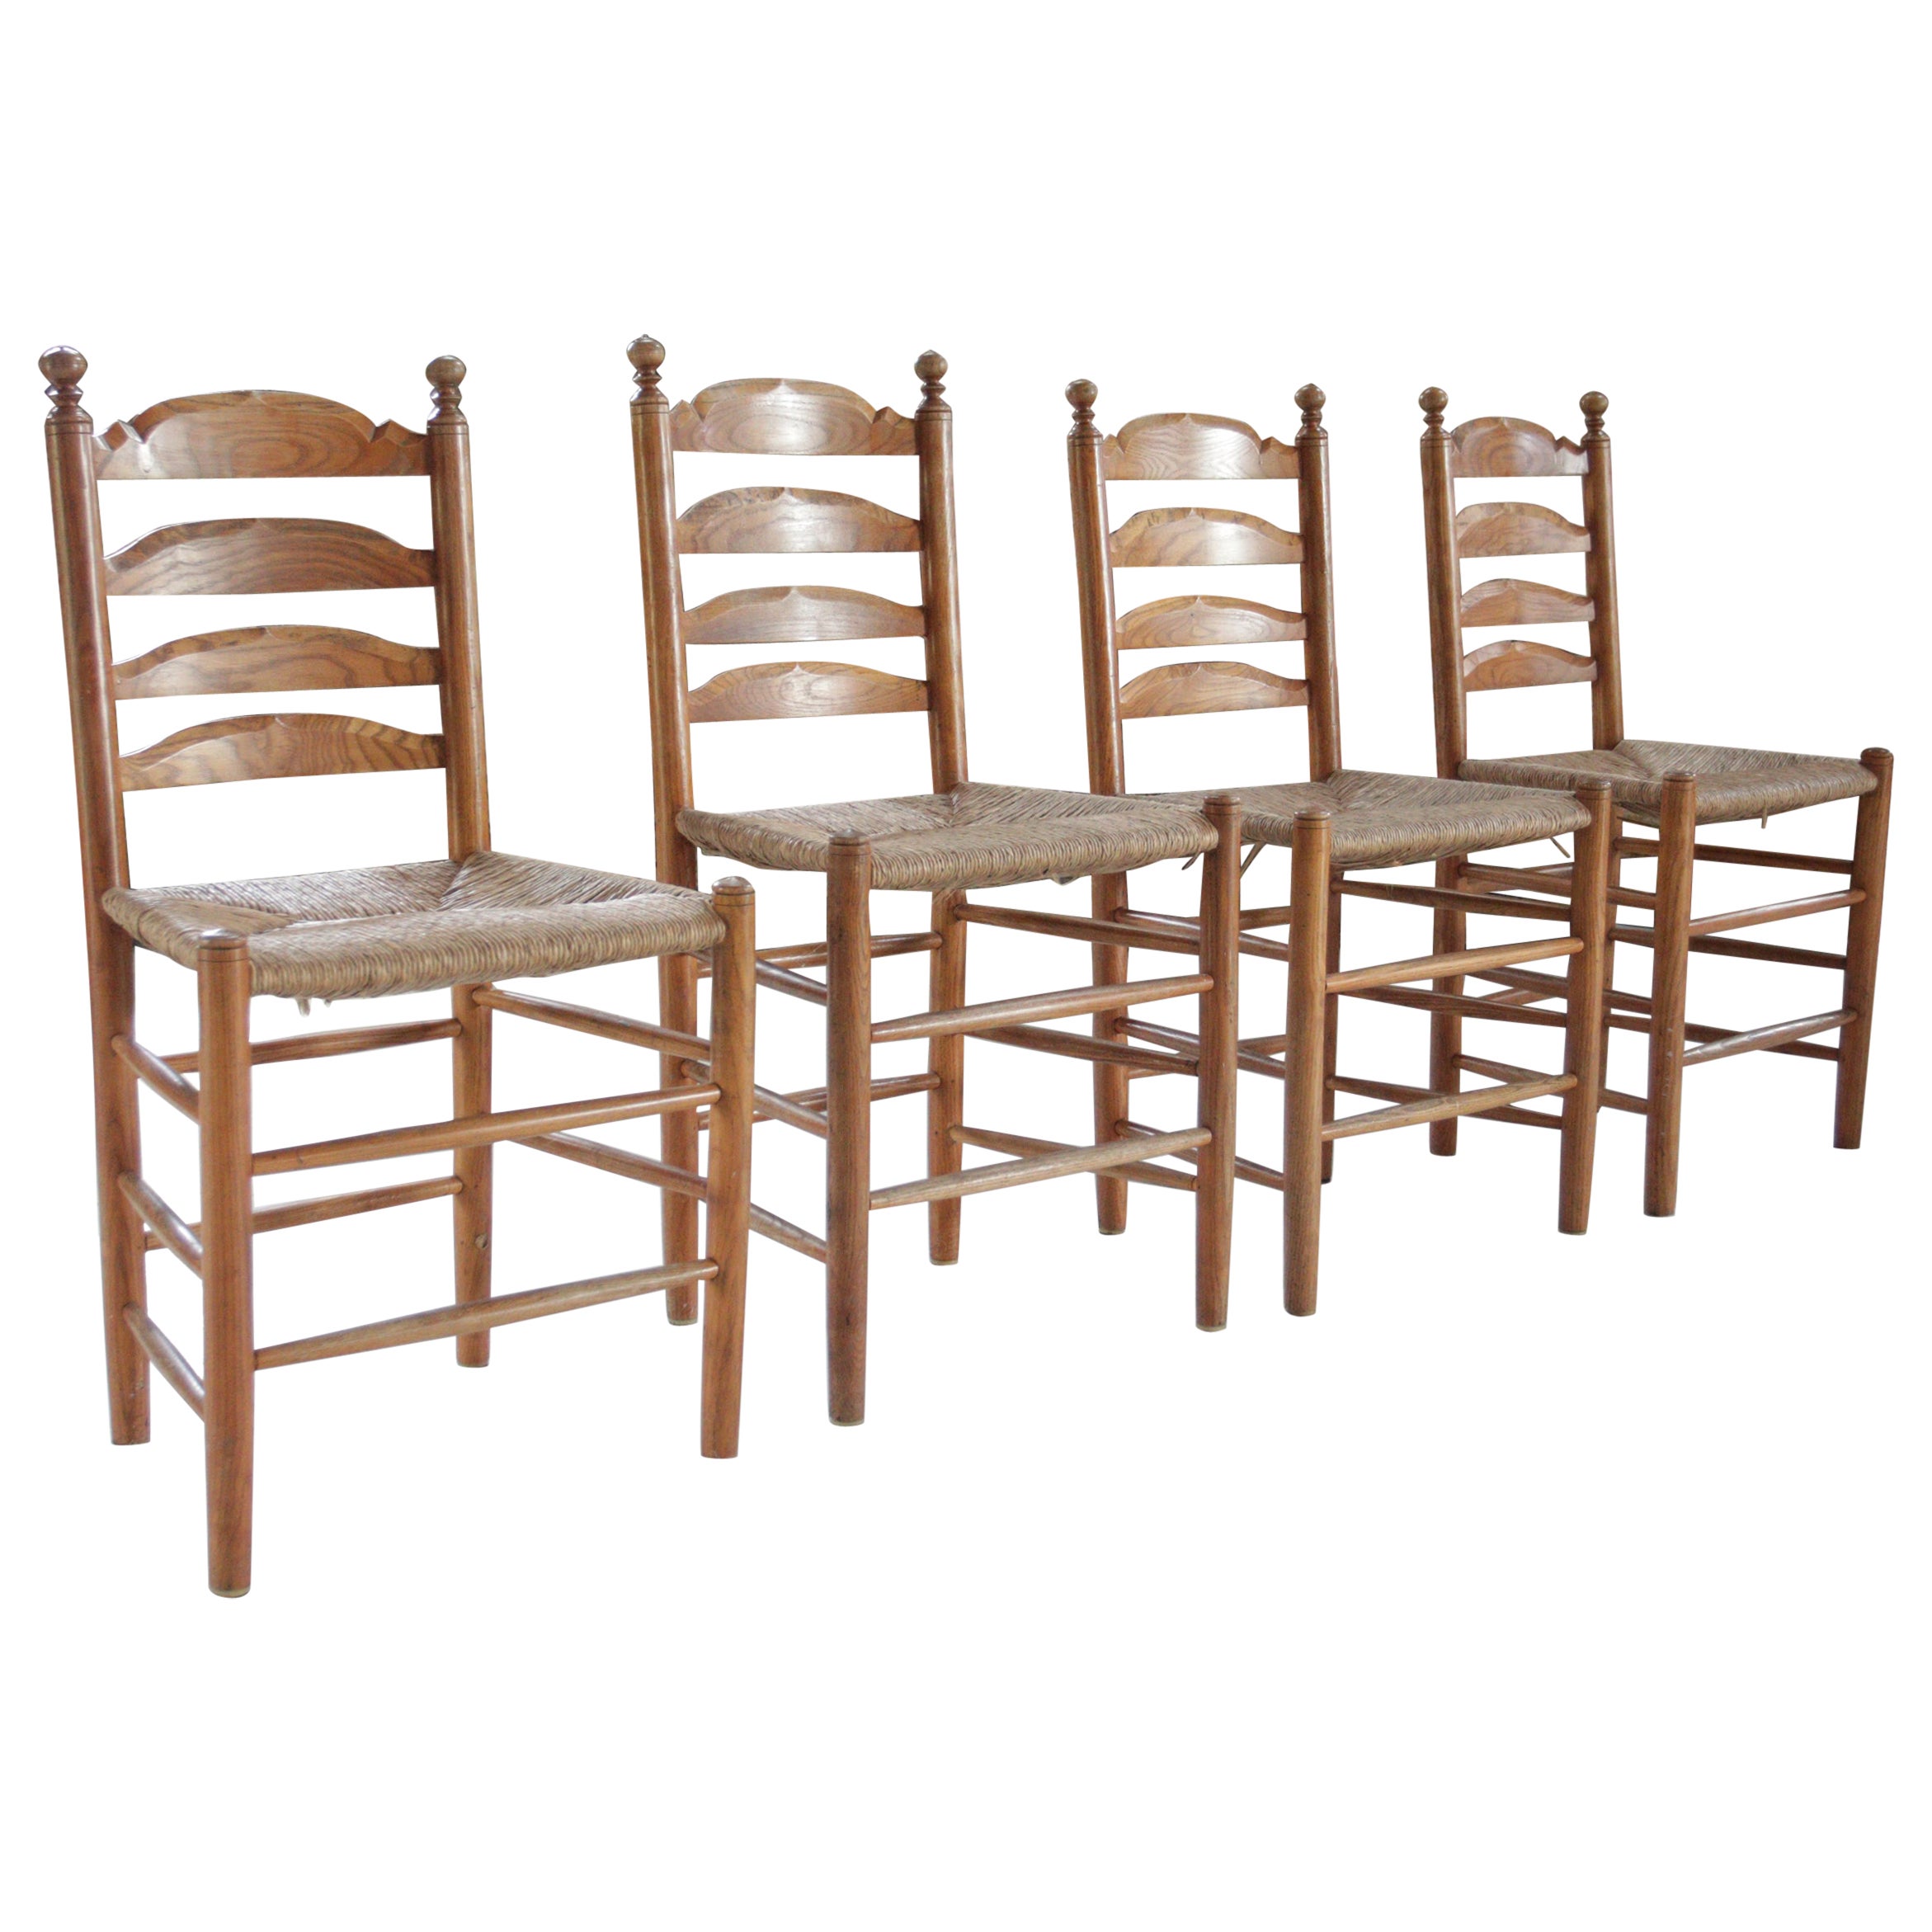 Set of 4 Old Rural Dutch Ladderback chairs 1960's